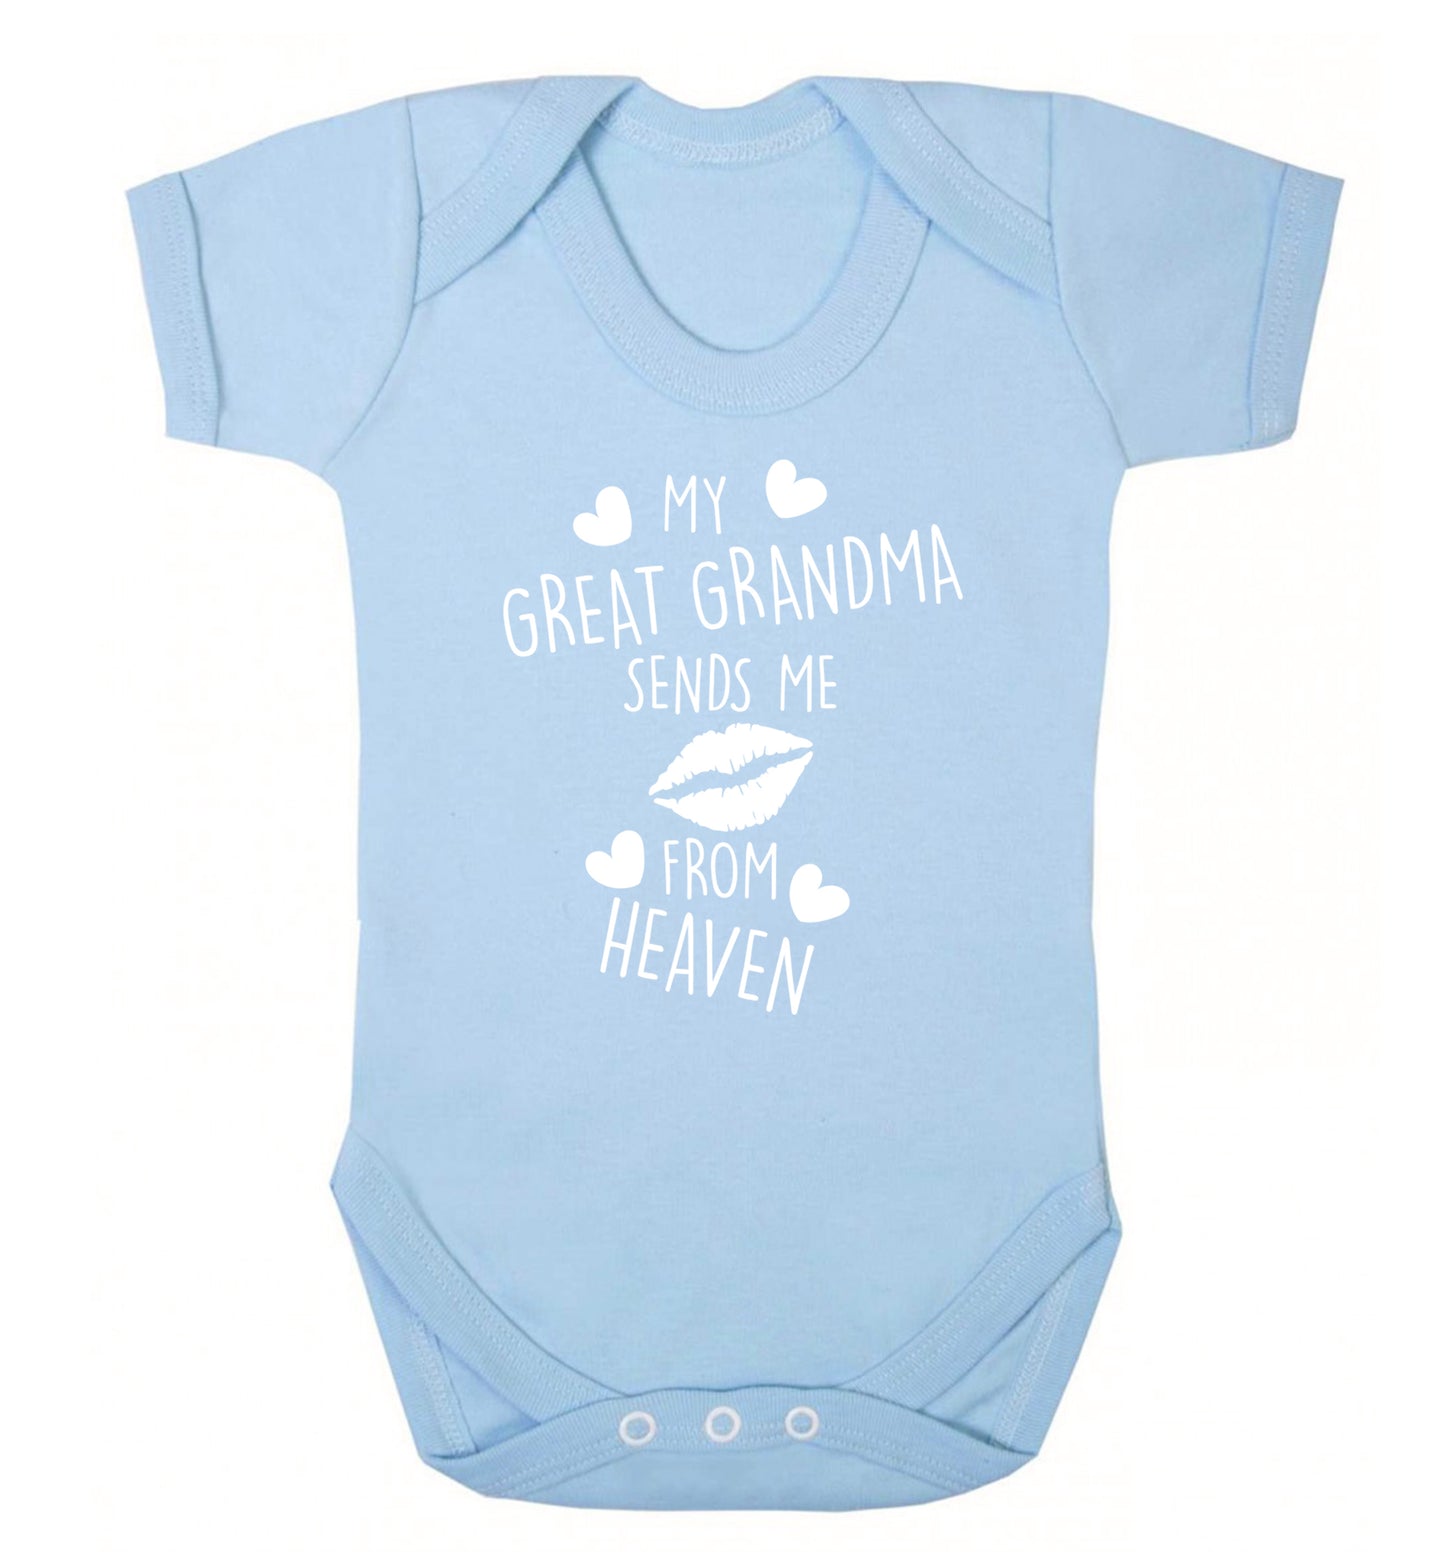 My great grandma sends me kisses from heaven Baby Vest pale blue 18-24 months